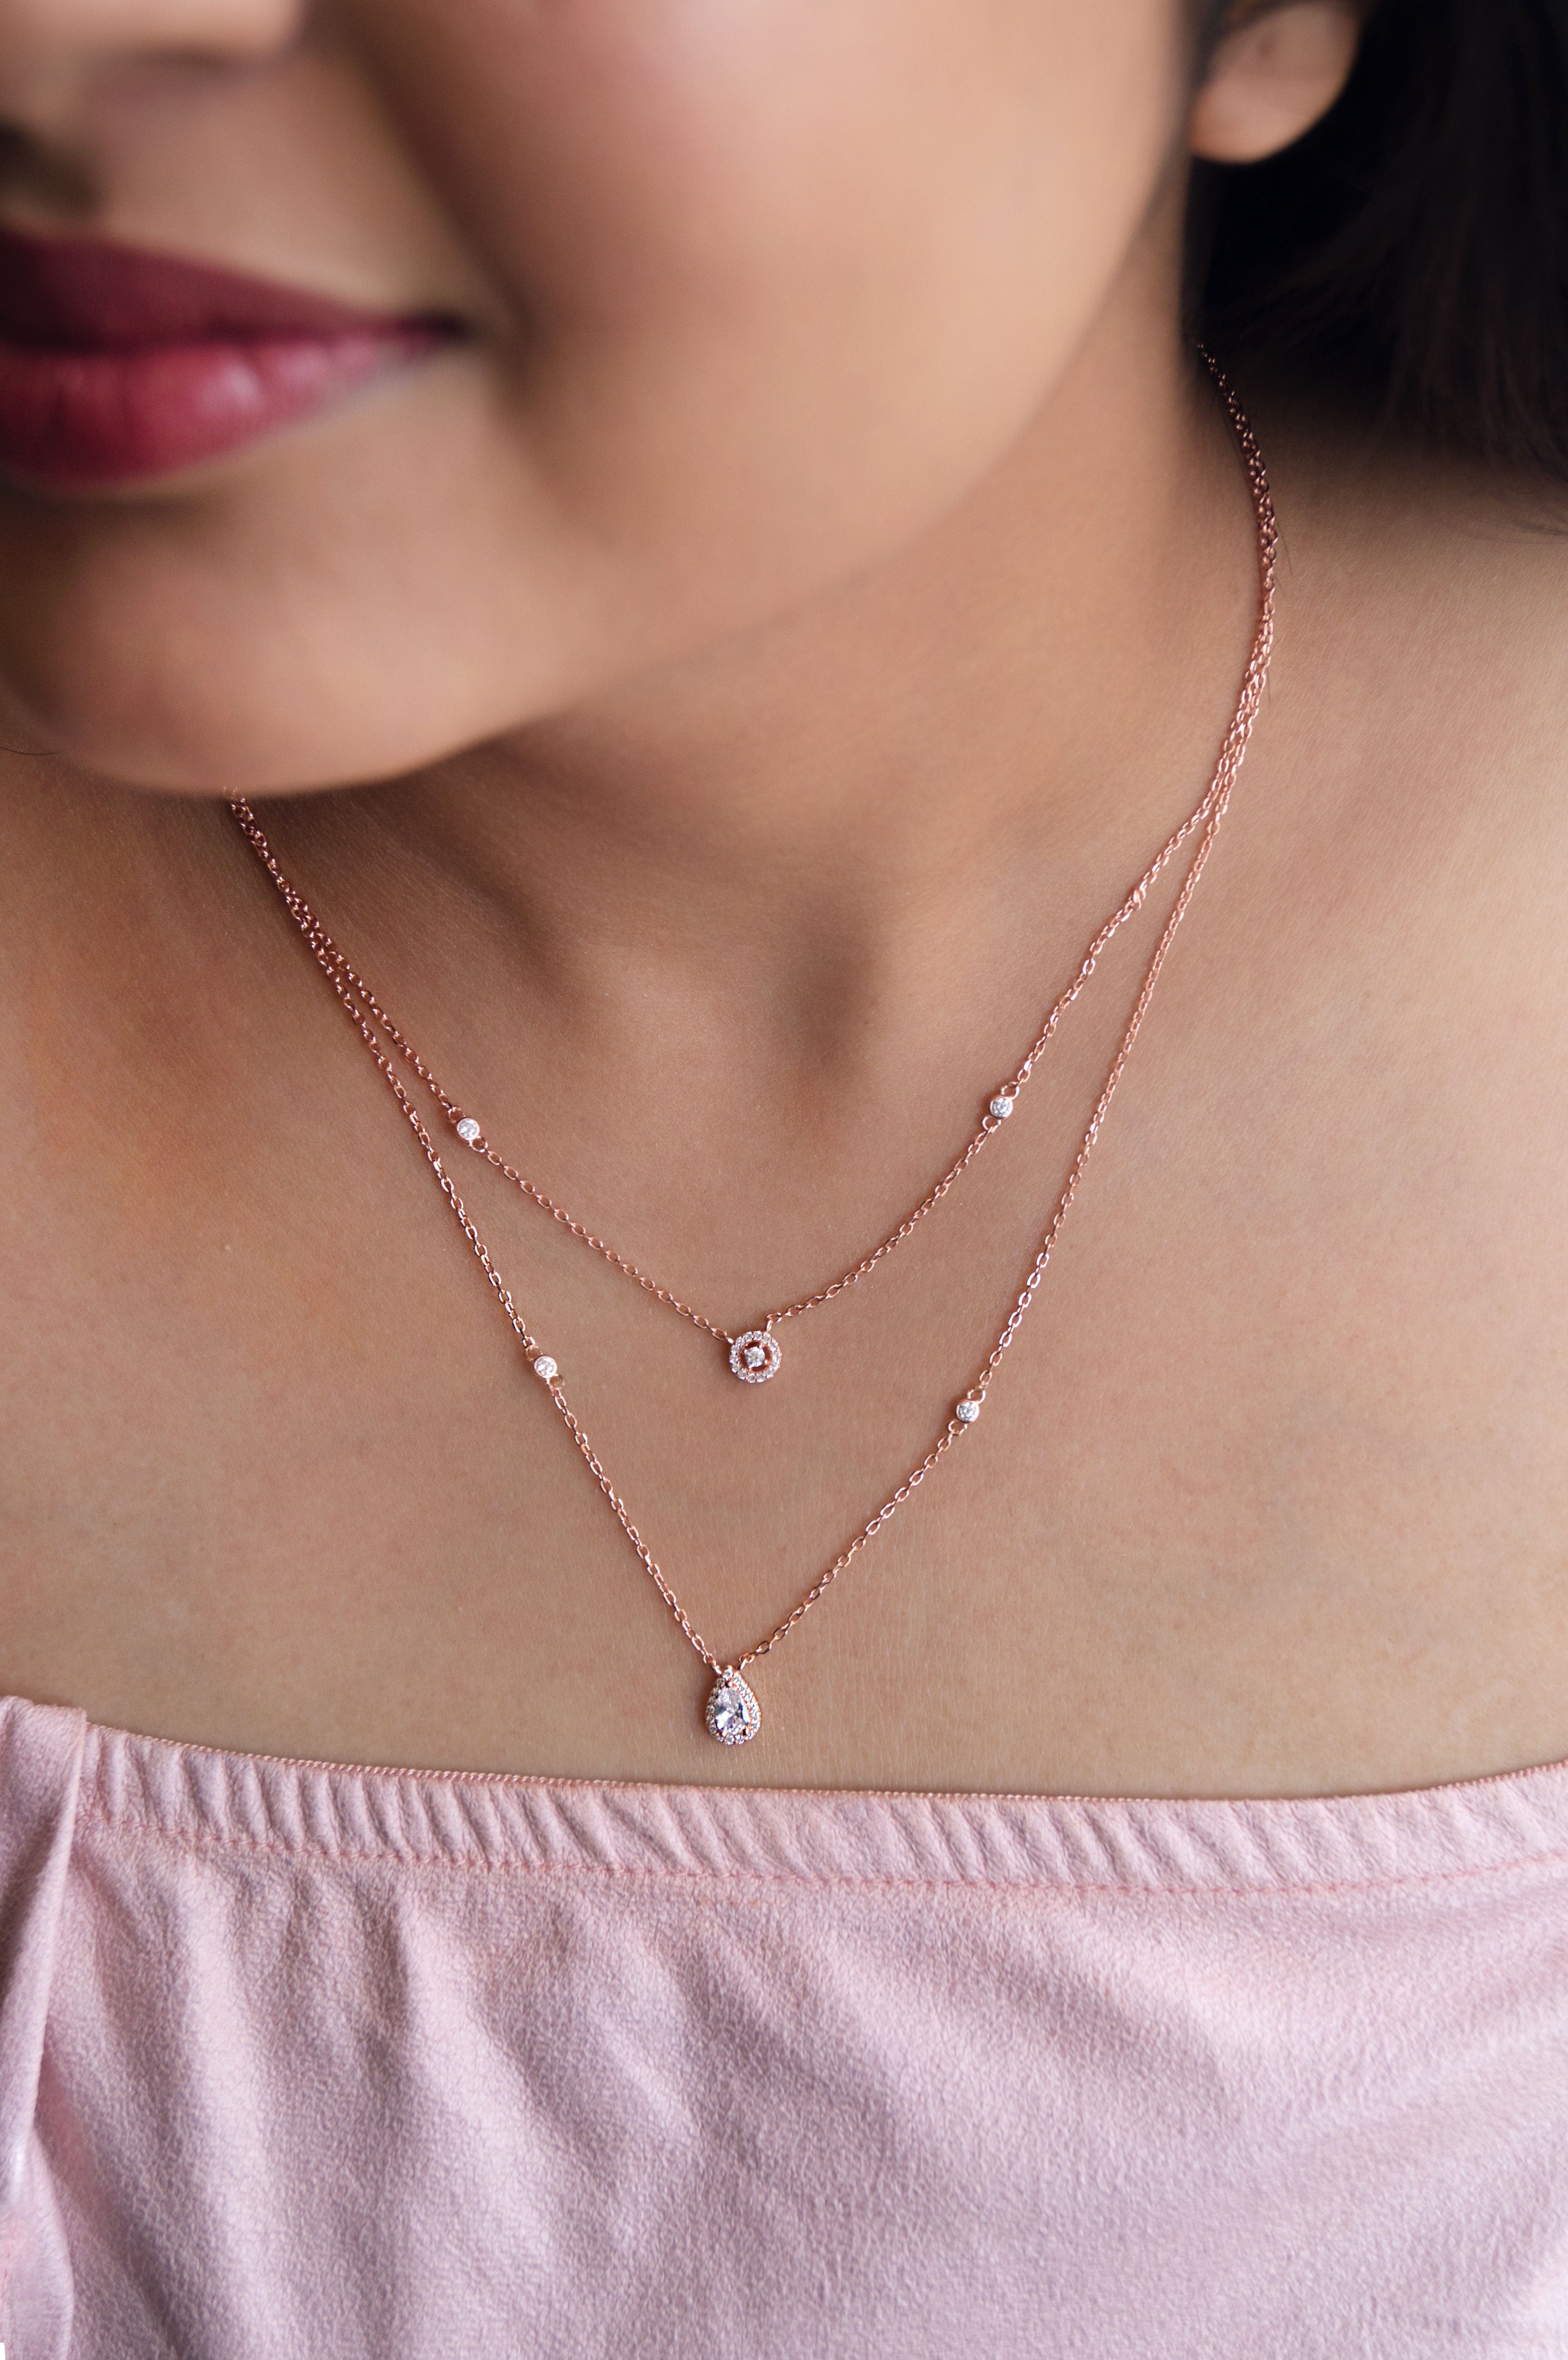 Set of 2 Layering Necklaces - Dainty CZ Solitaire Necklace and Engraved Bar Necklace Front / 18/20 / Sterling Silver